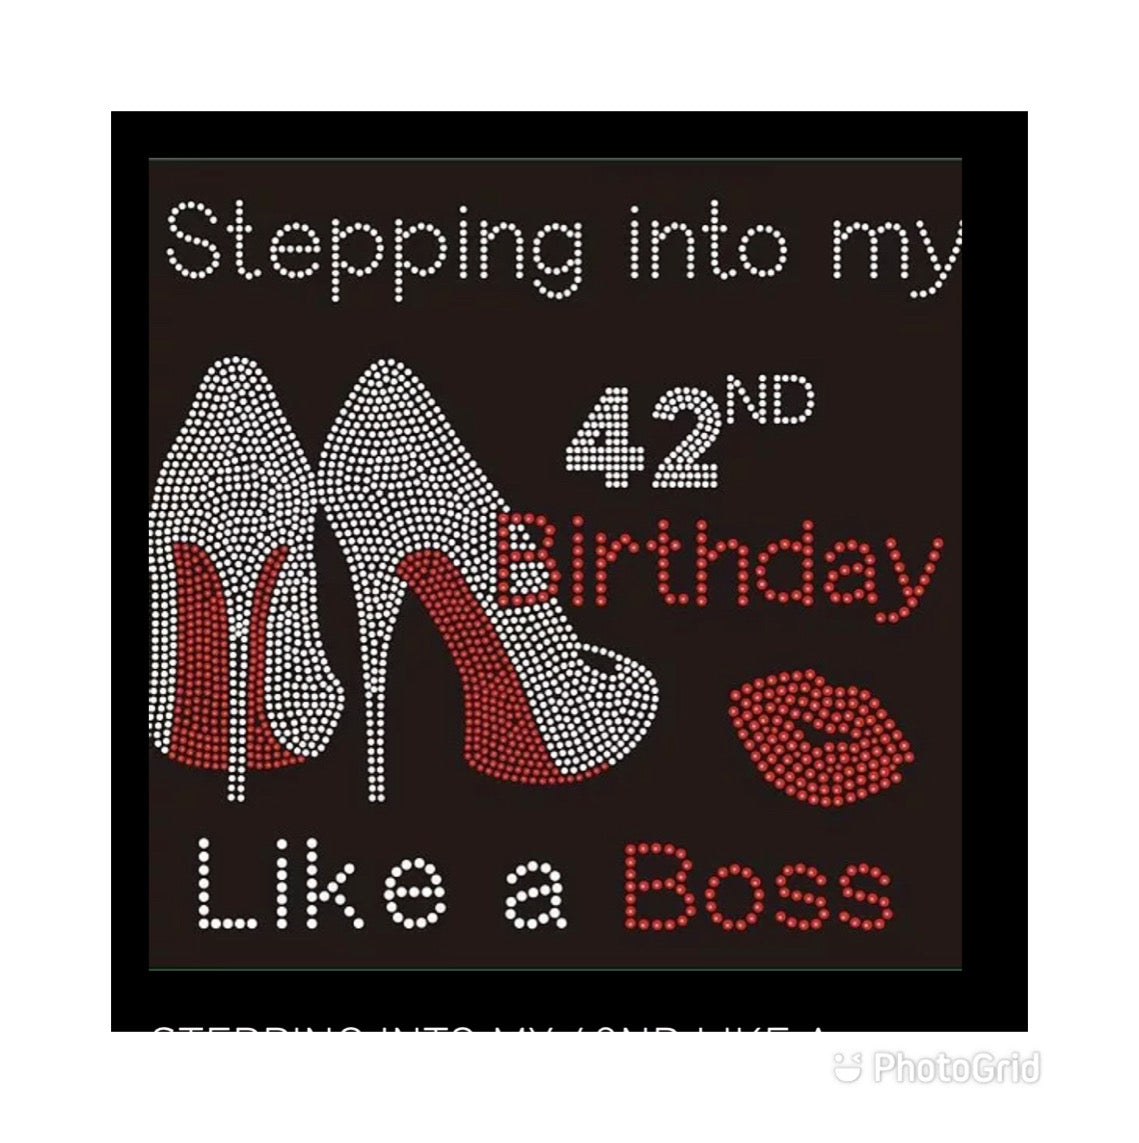 Stepping into my 42nd